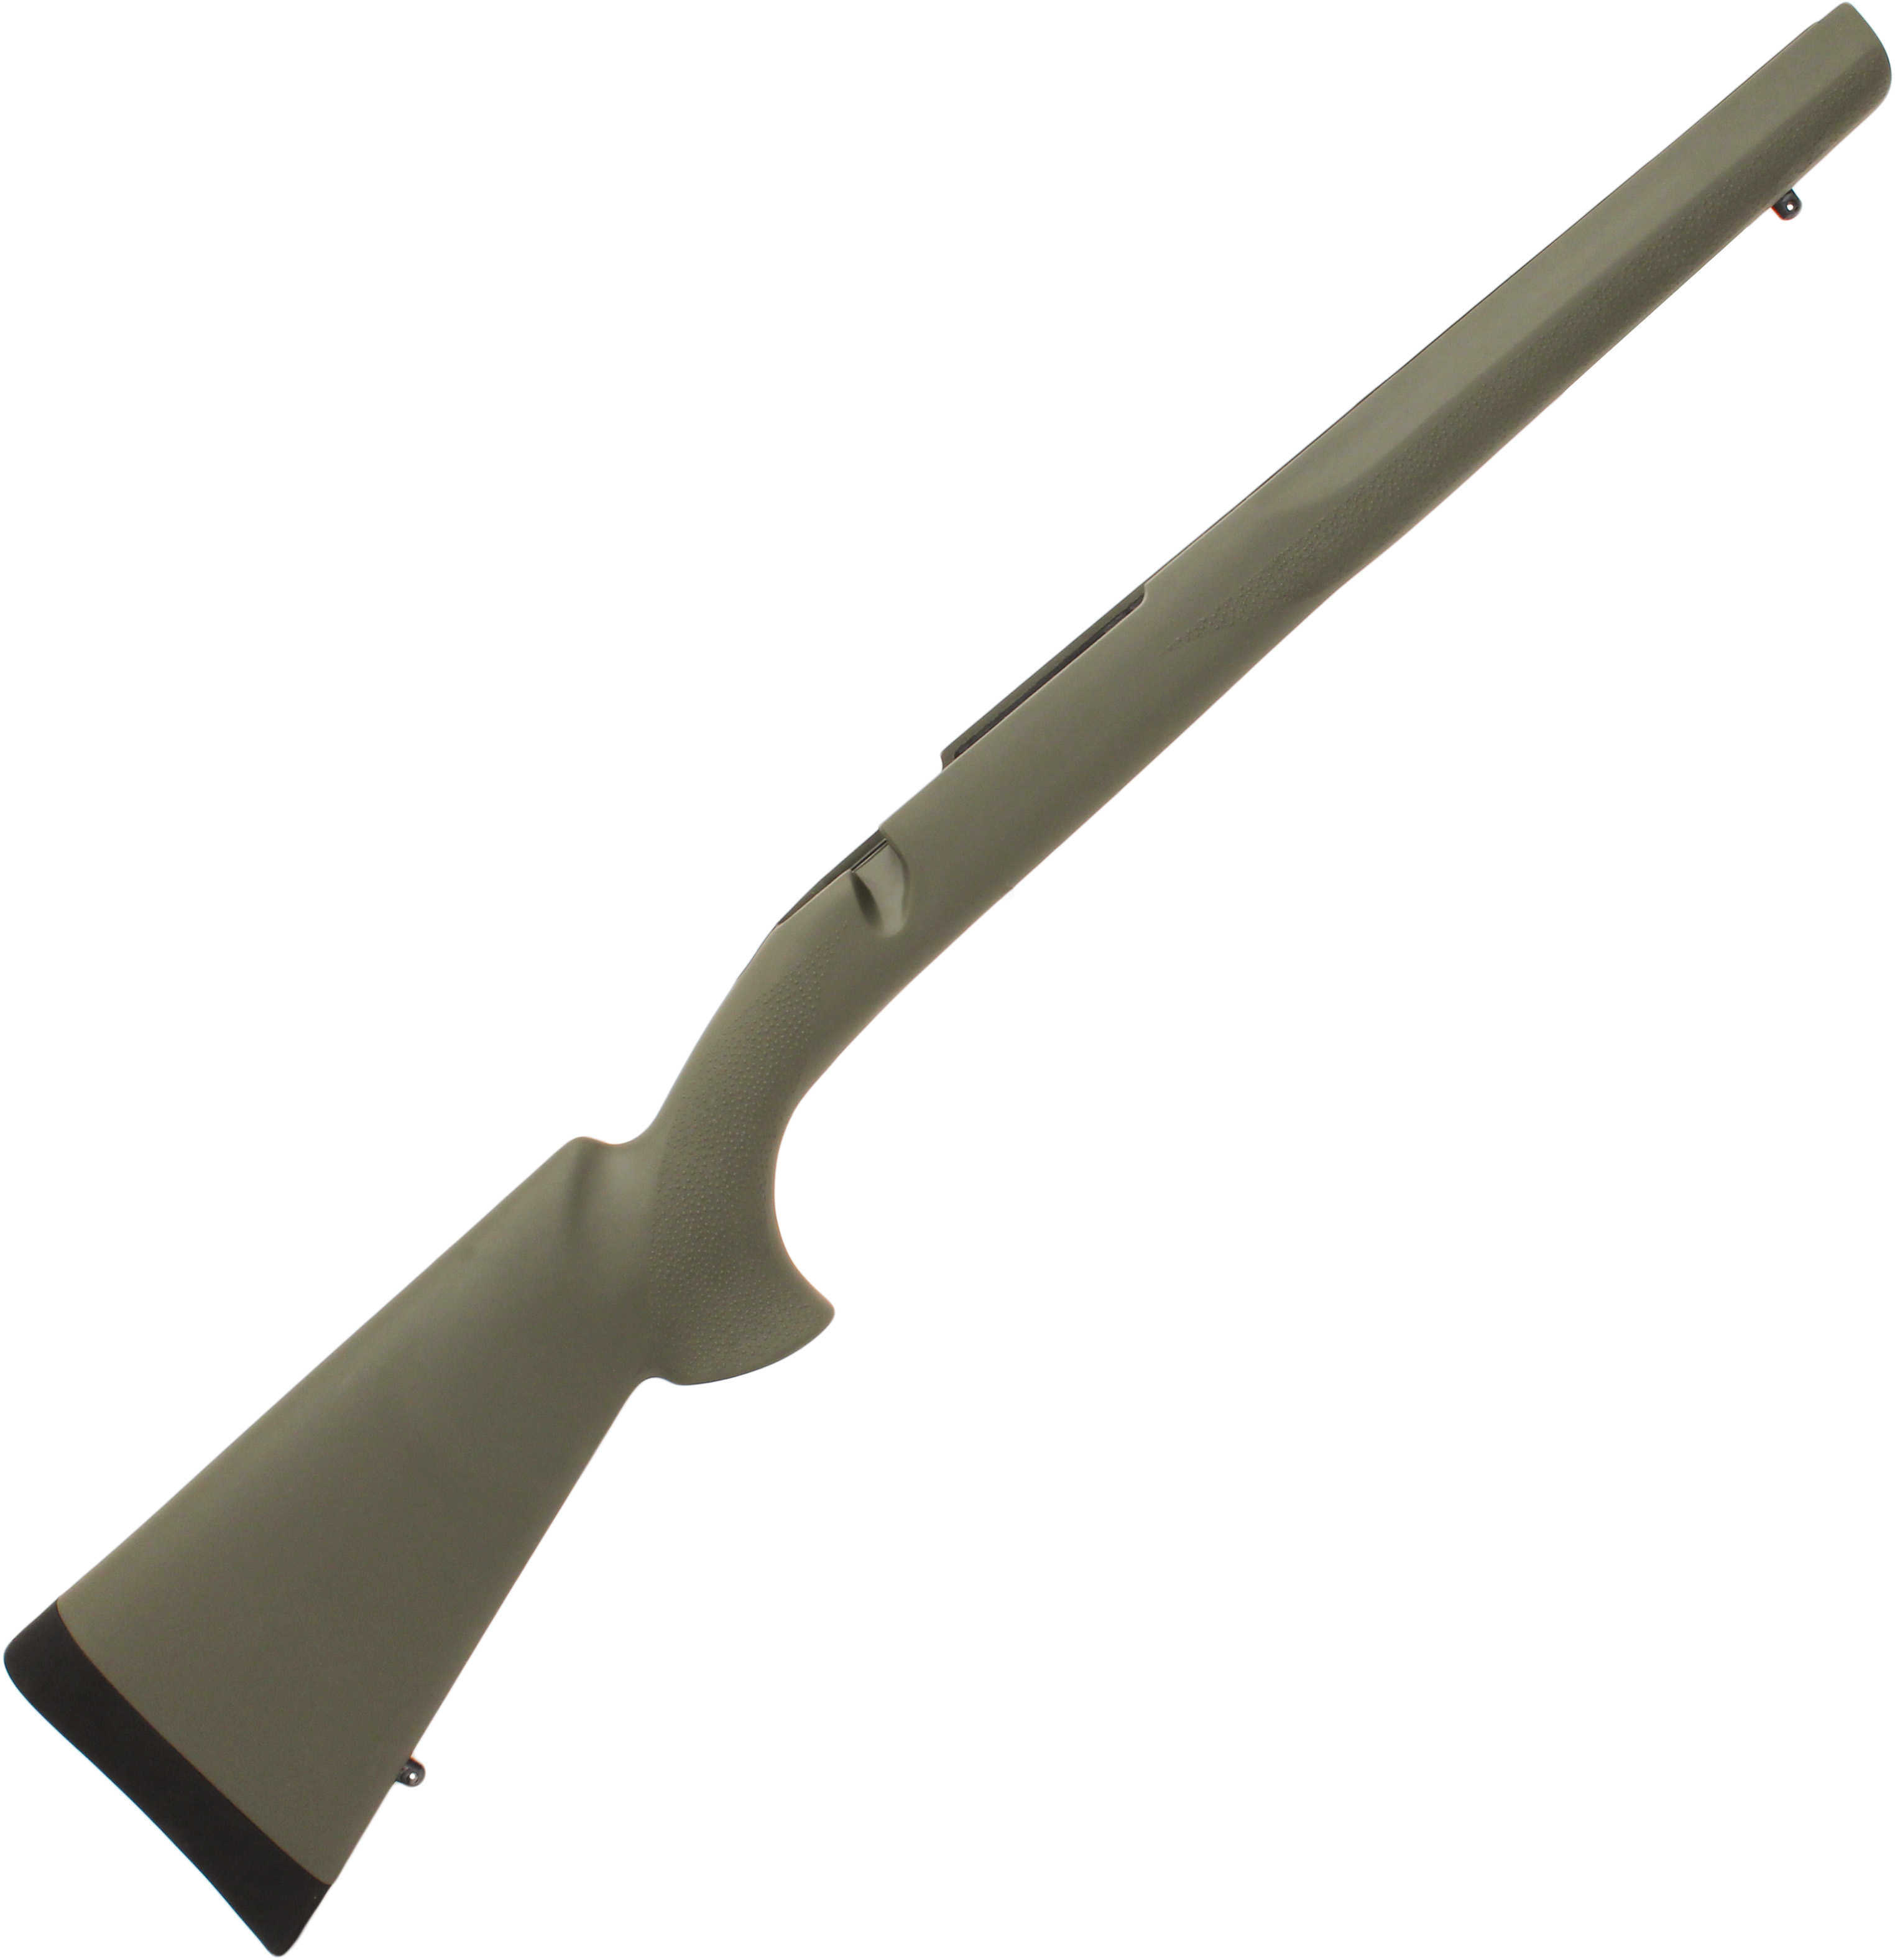 Hogue Ruger 77 MKII Long Action Overmolded Stock Heavy Barrel, Full Bed Block, Olive Drab Green 77213